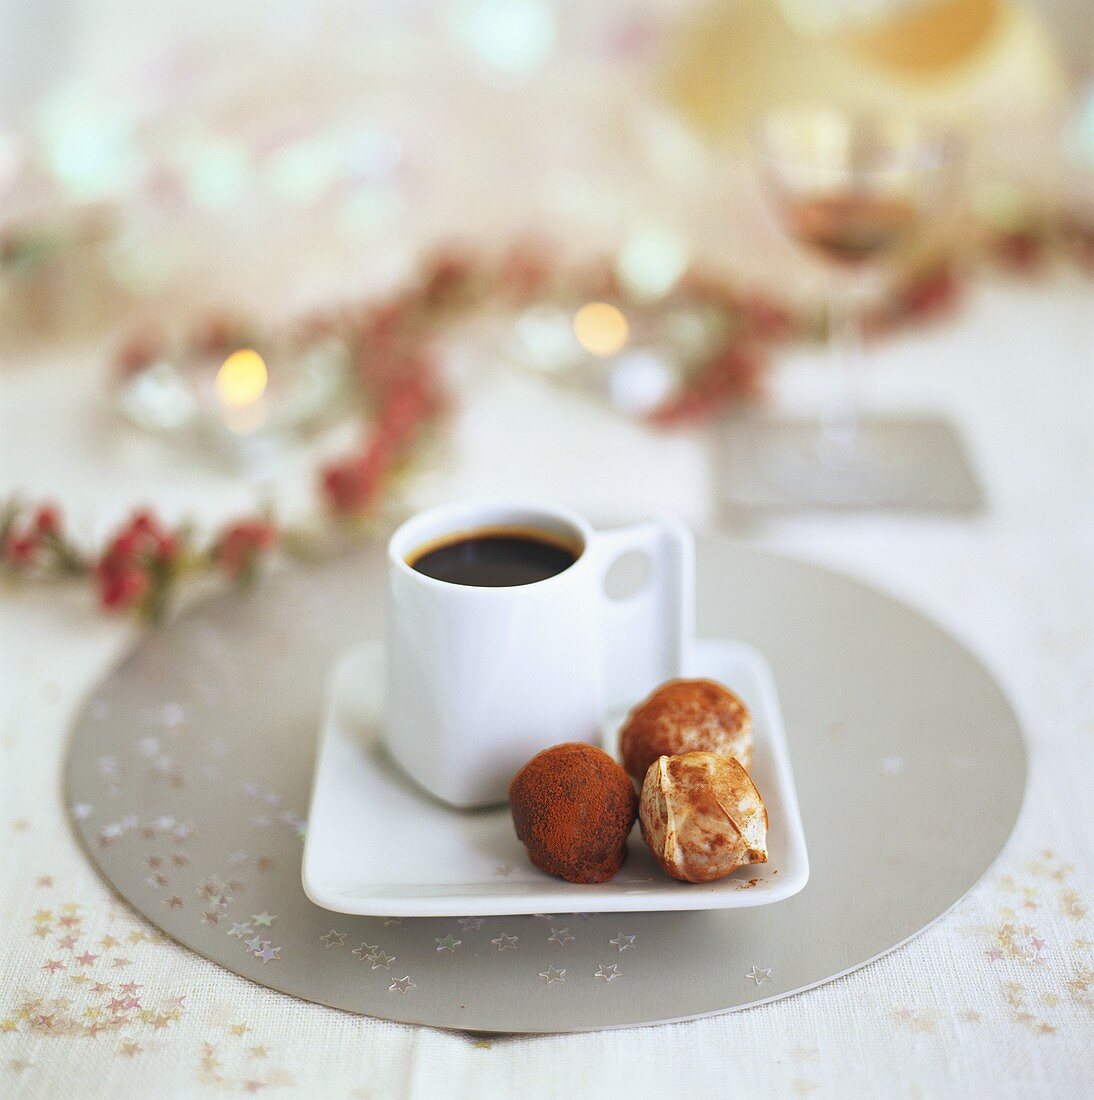 A cup of coffee and chocolate truffles